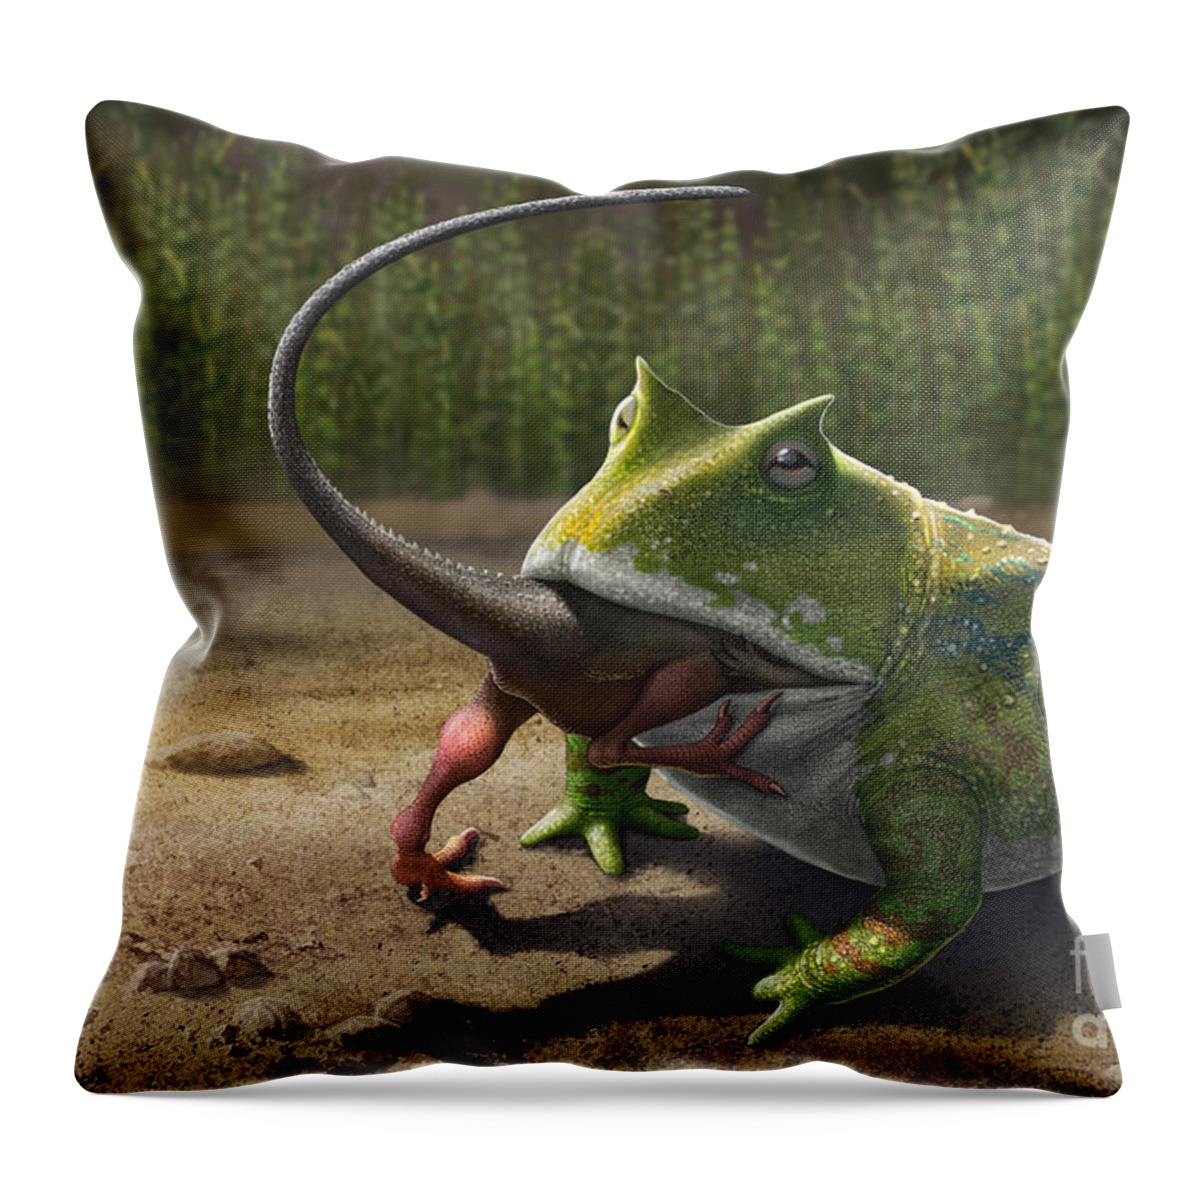 A Large Beelzebufo Frog Eating A Small Throw Pillow by Sergey Krasovskiy -  Pixels